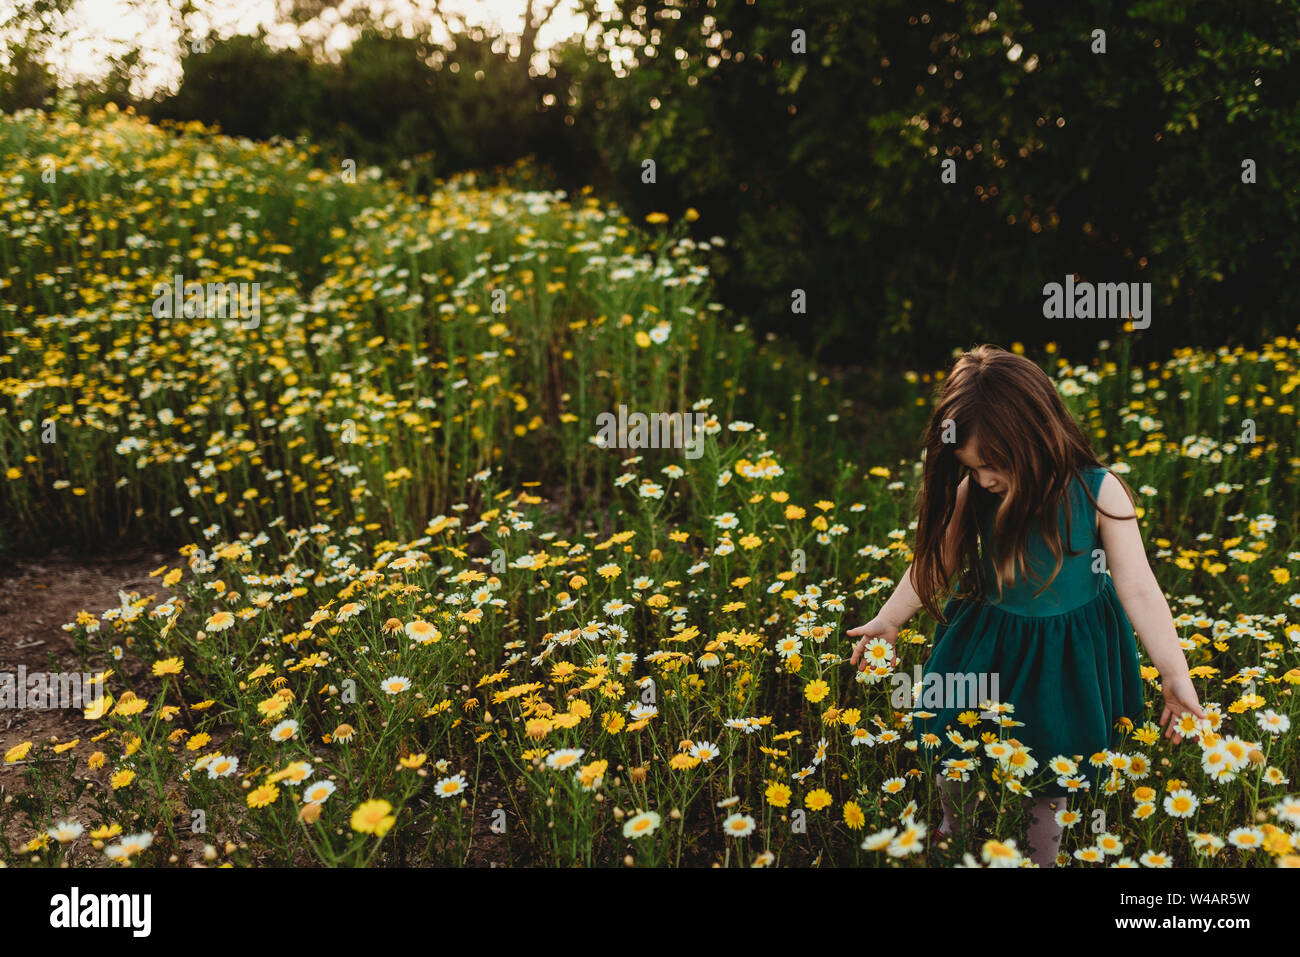 Little girl walking through field of flowers in spring Stock Photo